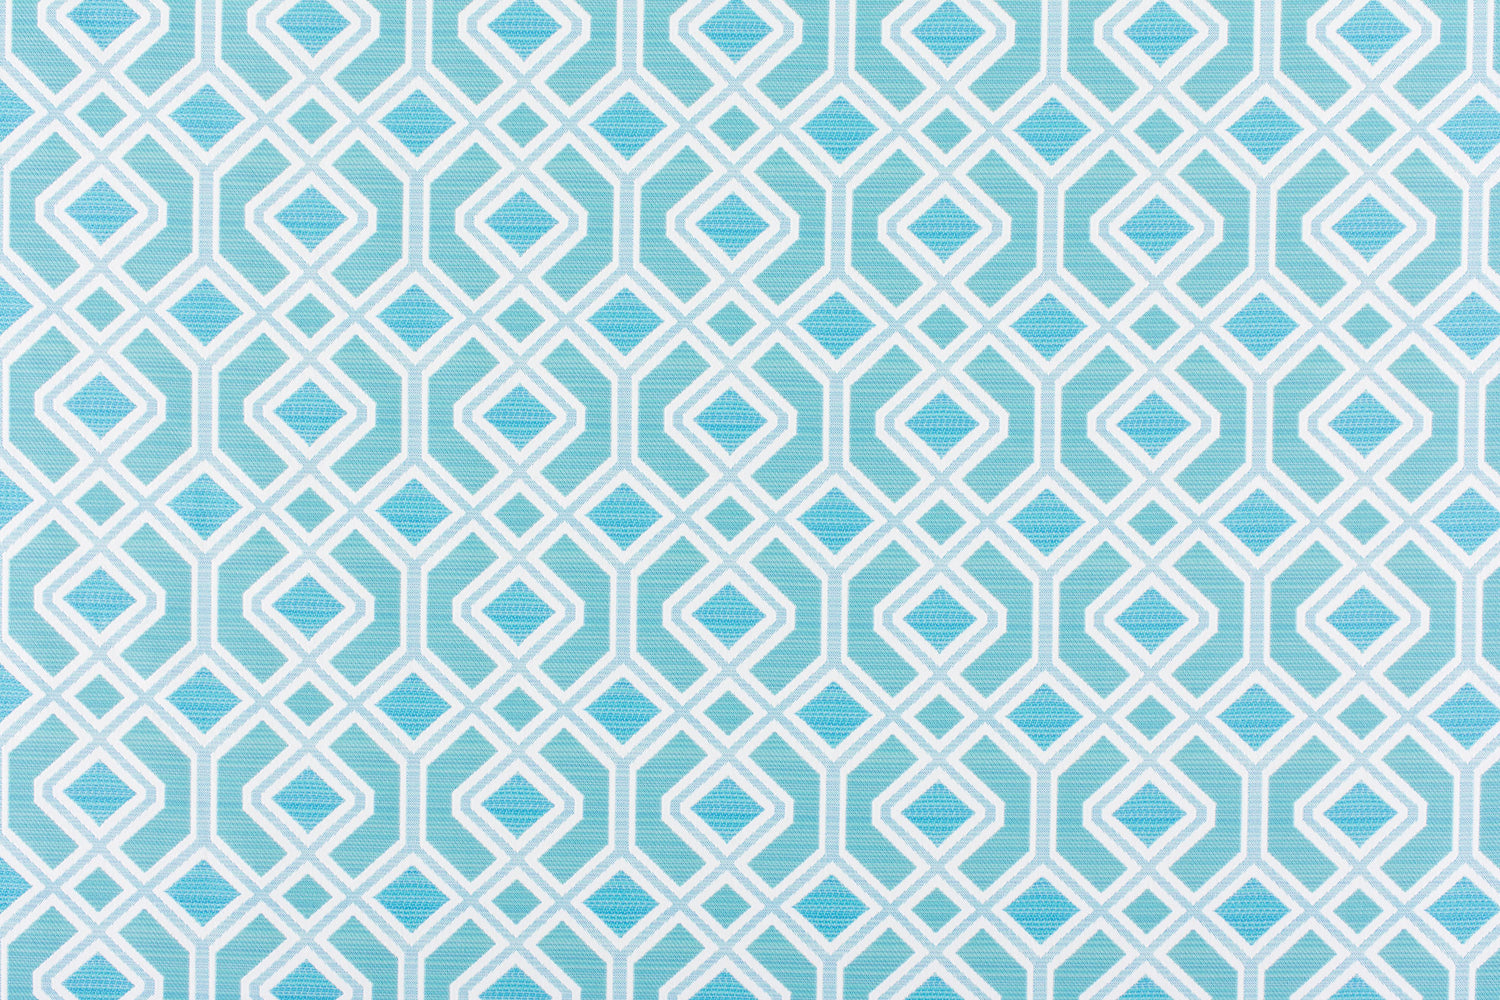 Oak Bluff fabric in turquoise color - pattern number WR 00022995 - by Scalamandre in the Old World Weavers collection